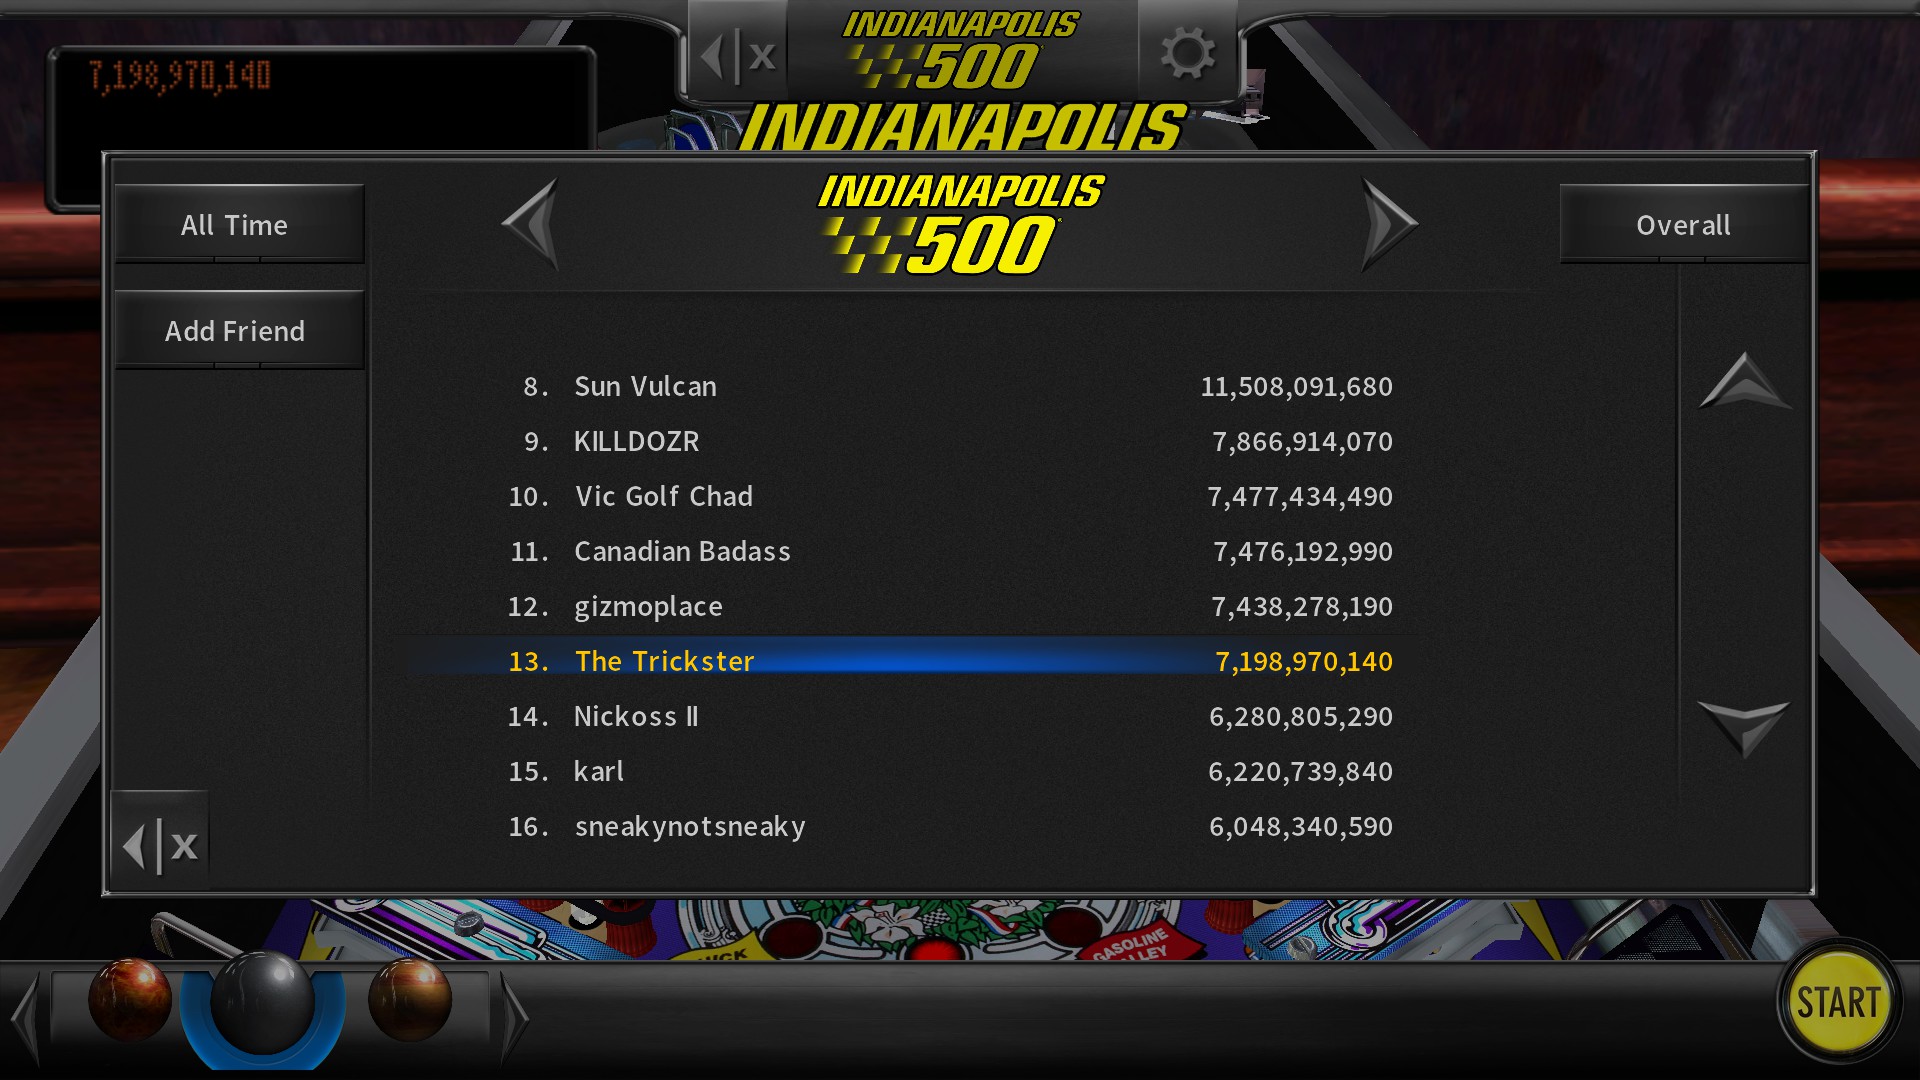 TheTrickster: Pinball Arcade: Indianapolis 500 (PC) 7,198,970,140 points on 2016-07-02 16:18:36